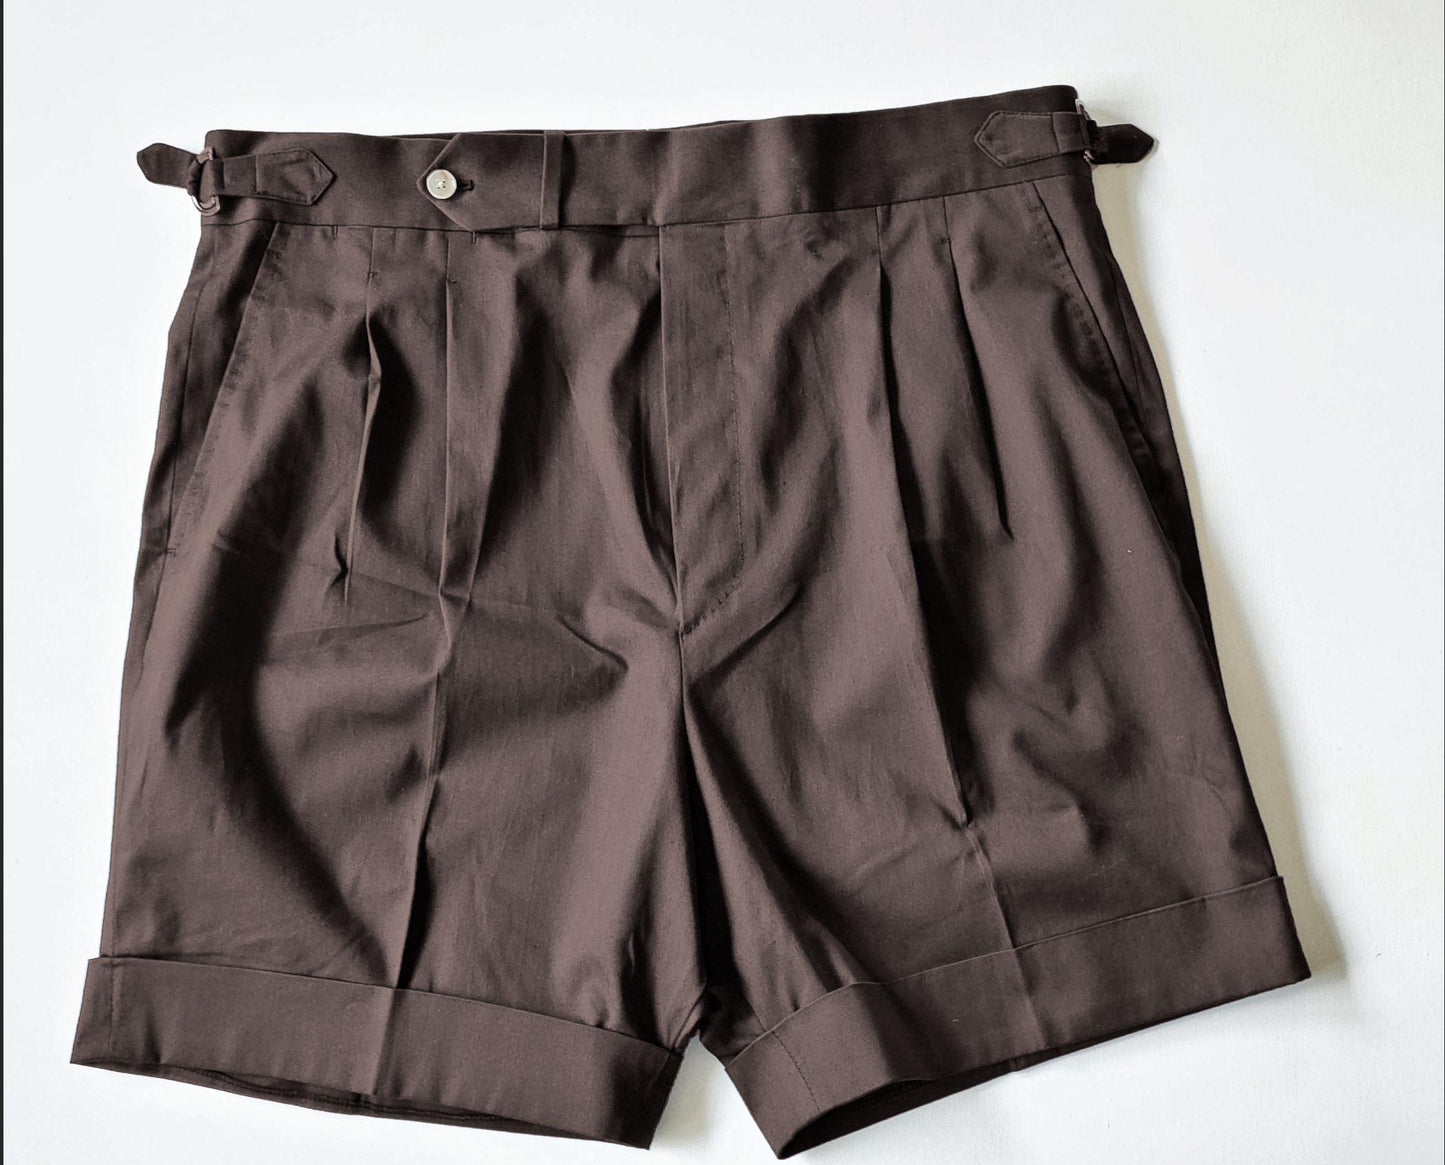 High Waisted Cotton Twill Shorts